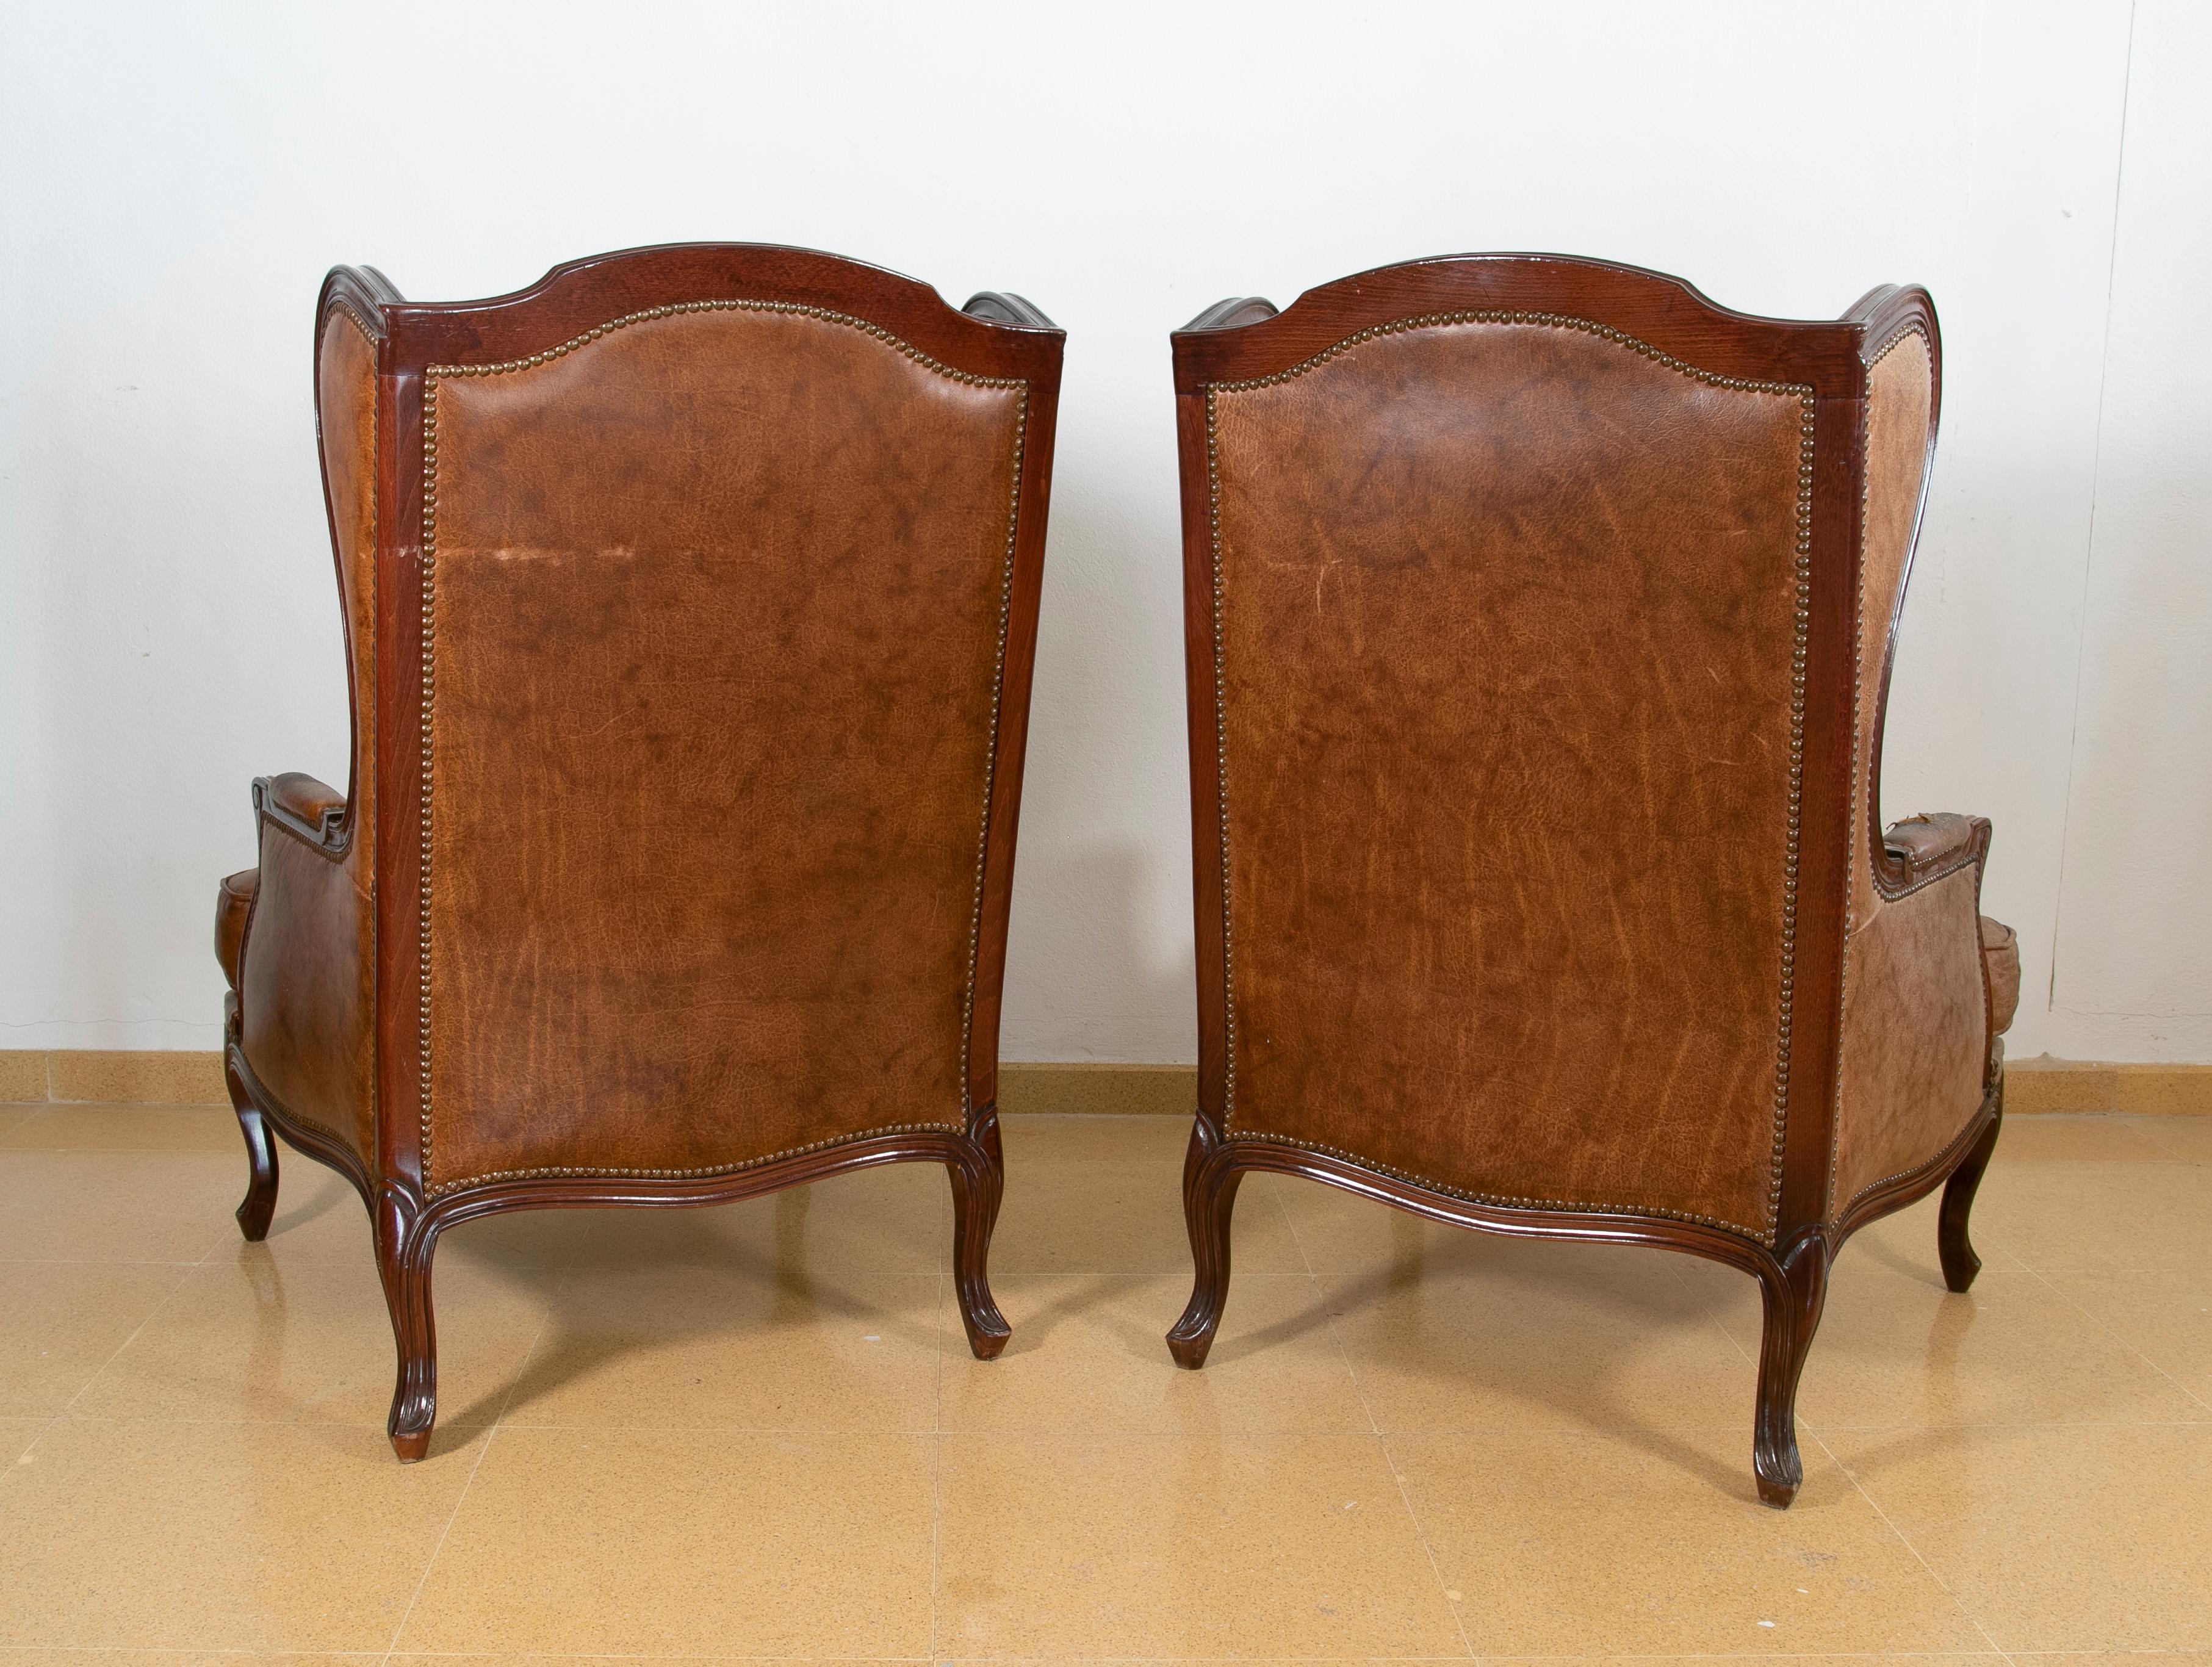 1980s English Pair of Wooden Armchairs Upholstered in Leather For Sale 1